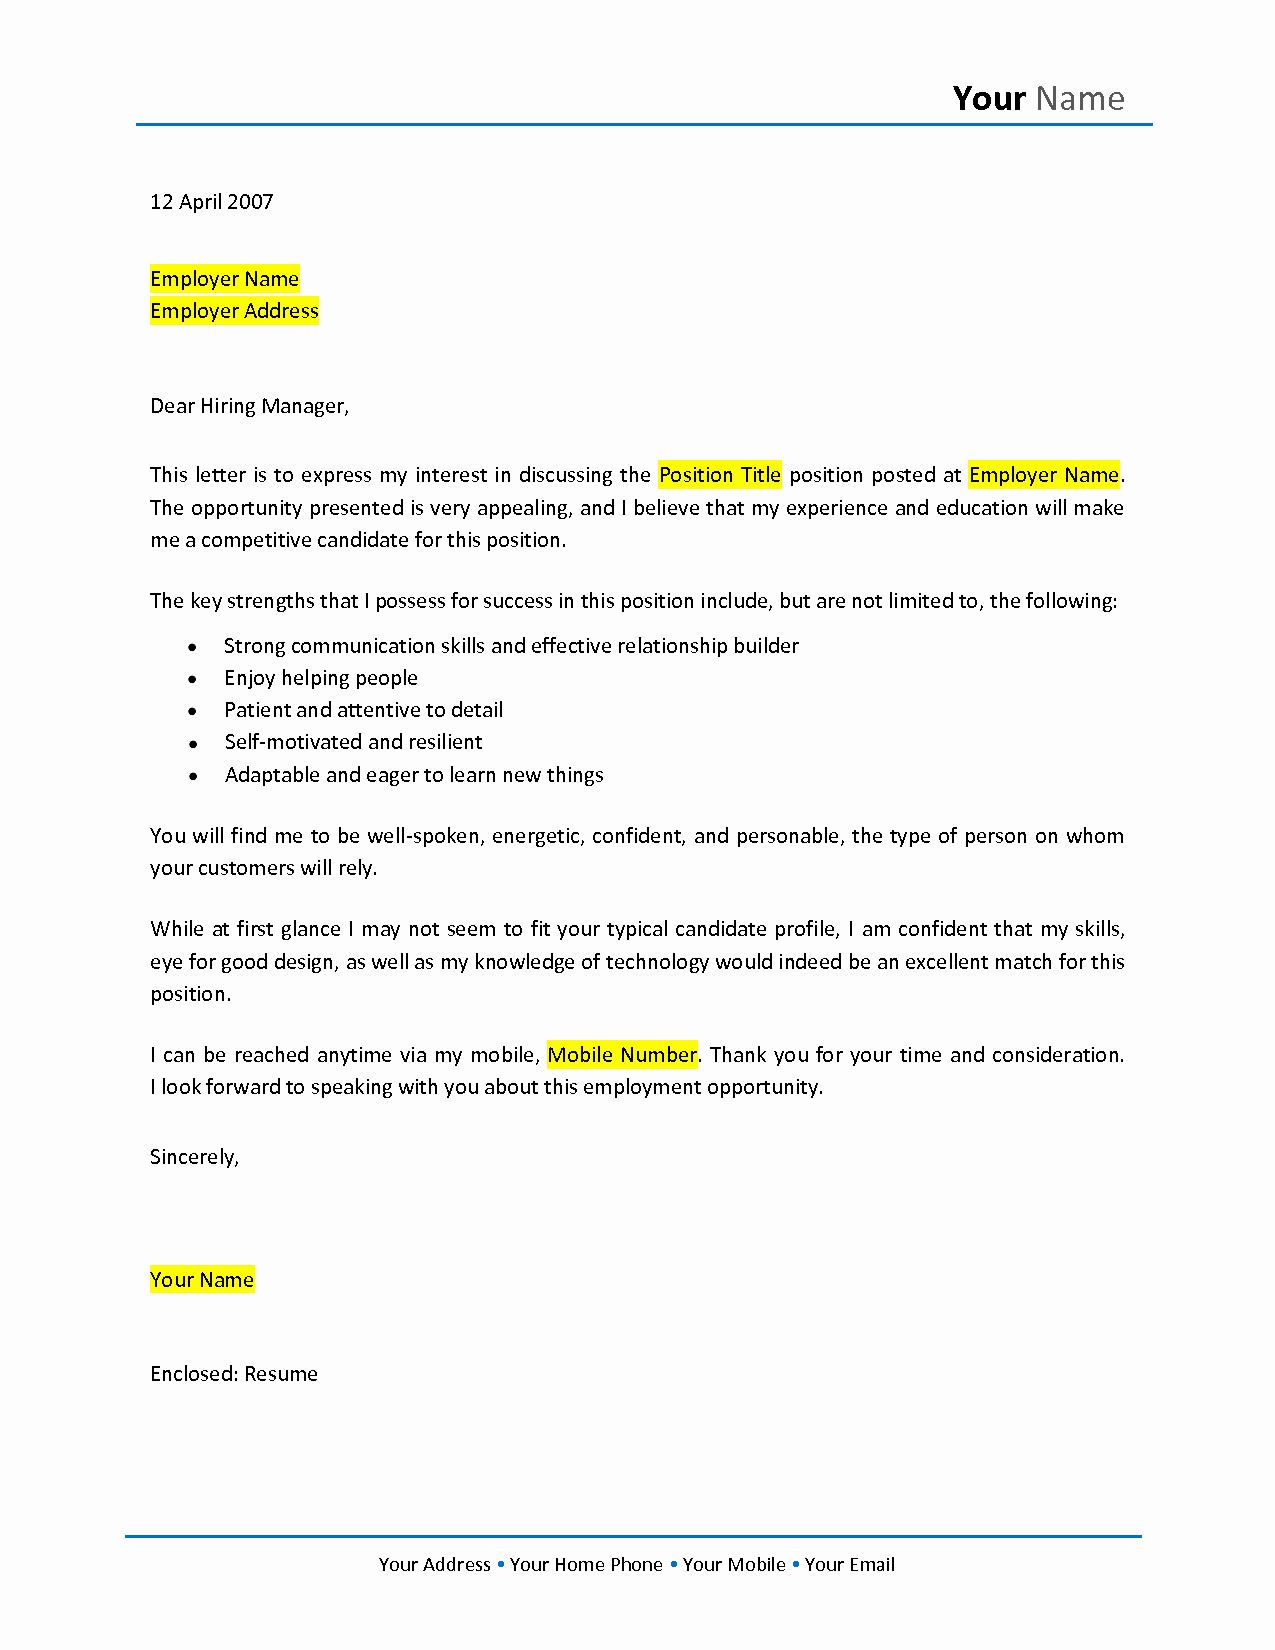 Cover Letter Career Change Awesome Career Change Cover Letter Sample Samples Uk with